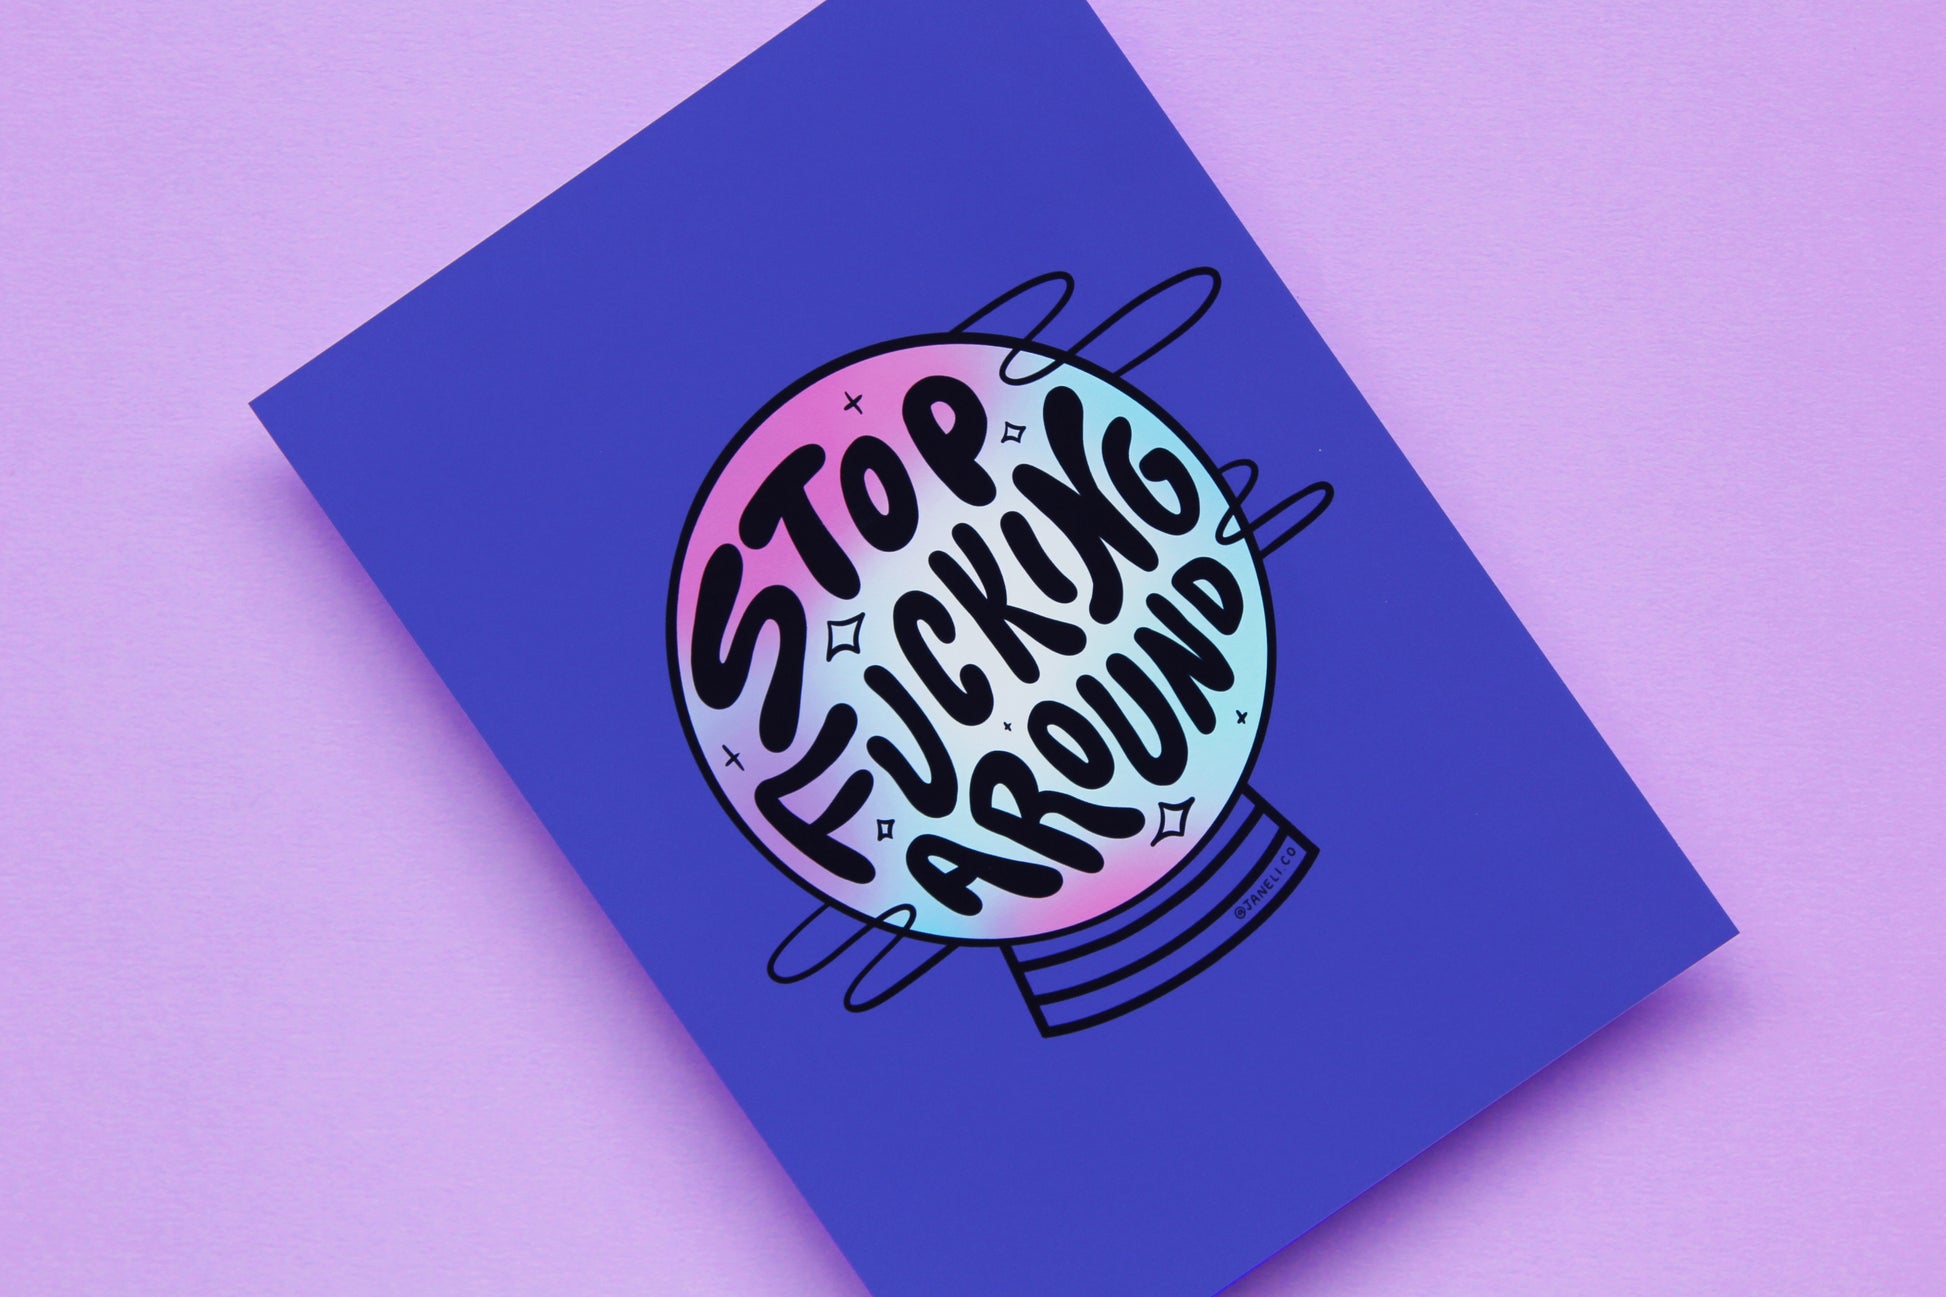 A close up of a JaneLi.Co print that says "Stop Fucking Around" in the shape of a magic crystal ball over a purple background.